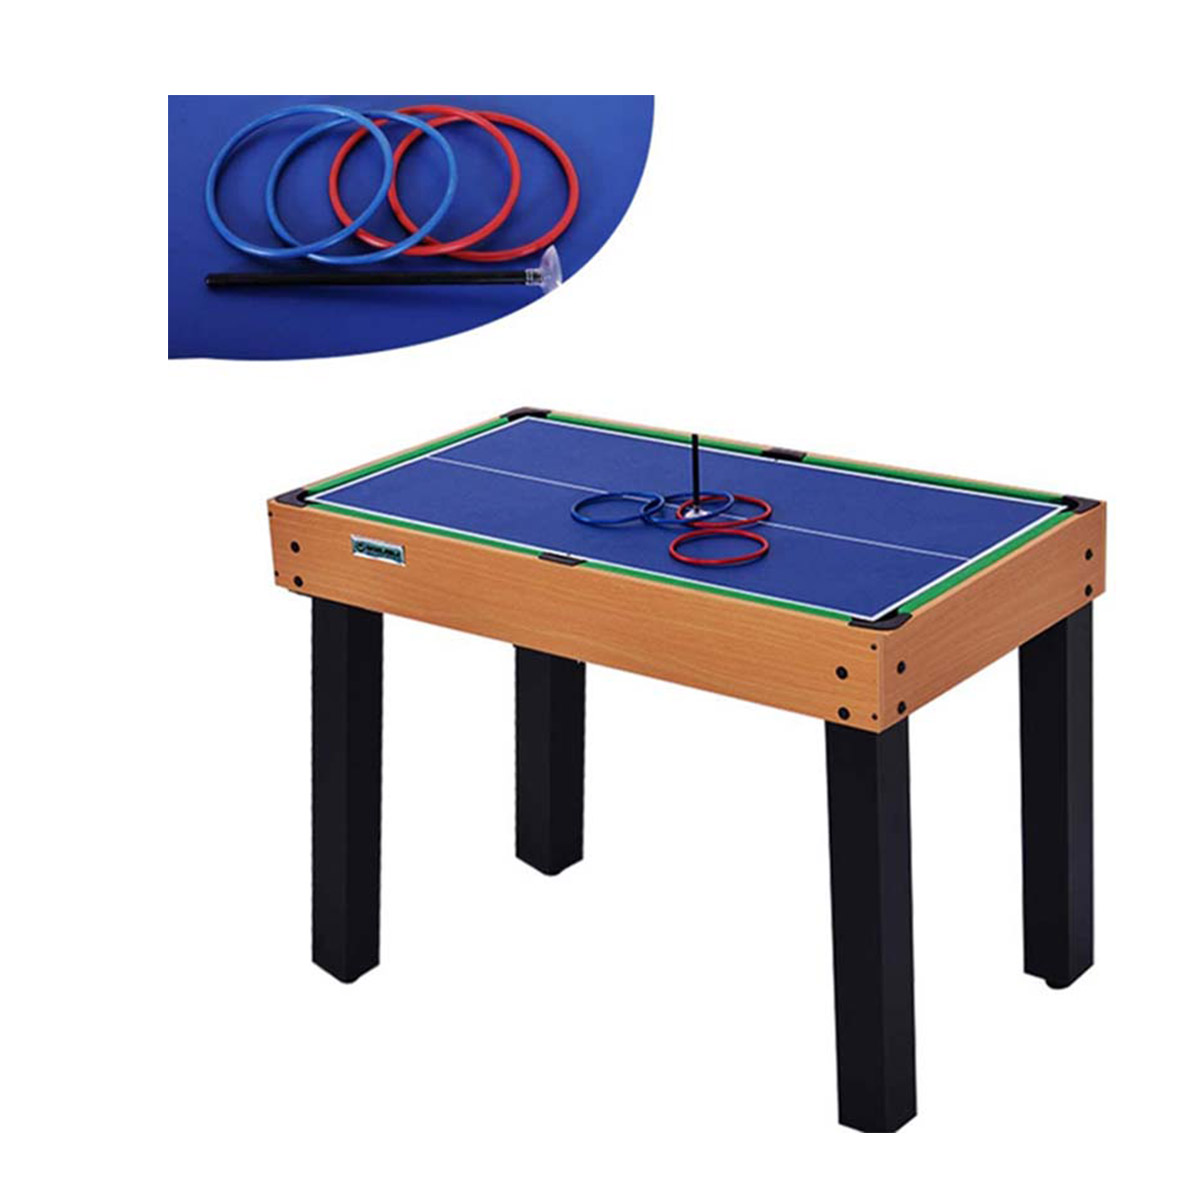 https://www.winmaxdartgame.com/multifunctional-game-table-home-recreation-includes-12-different-gameswin-max-product/